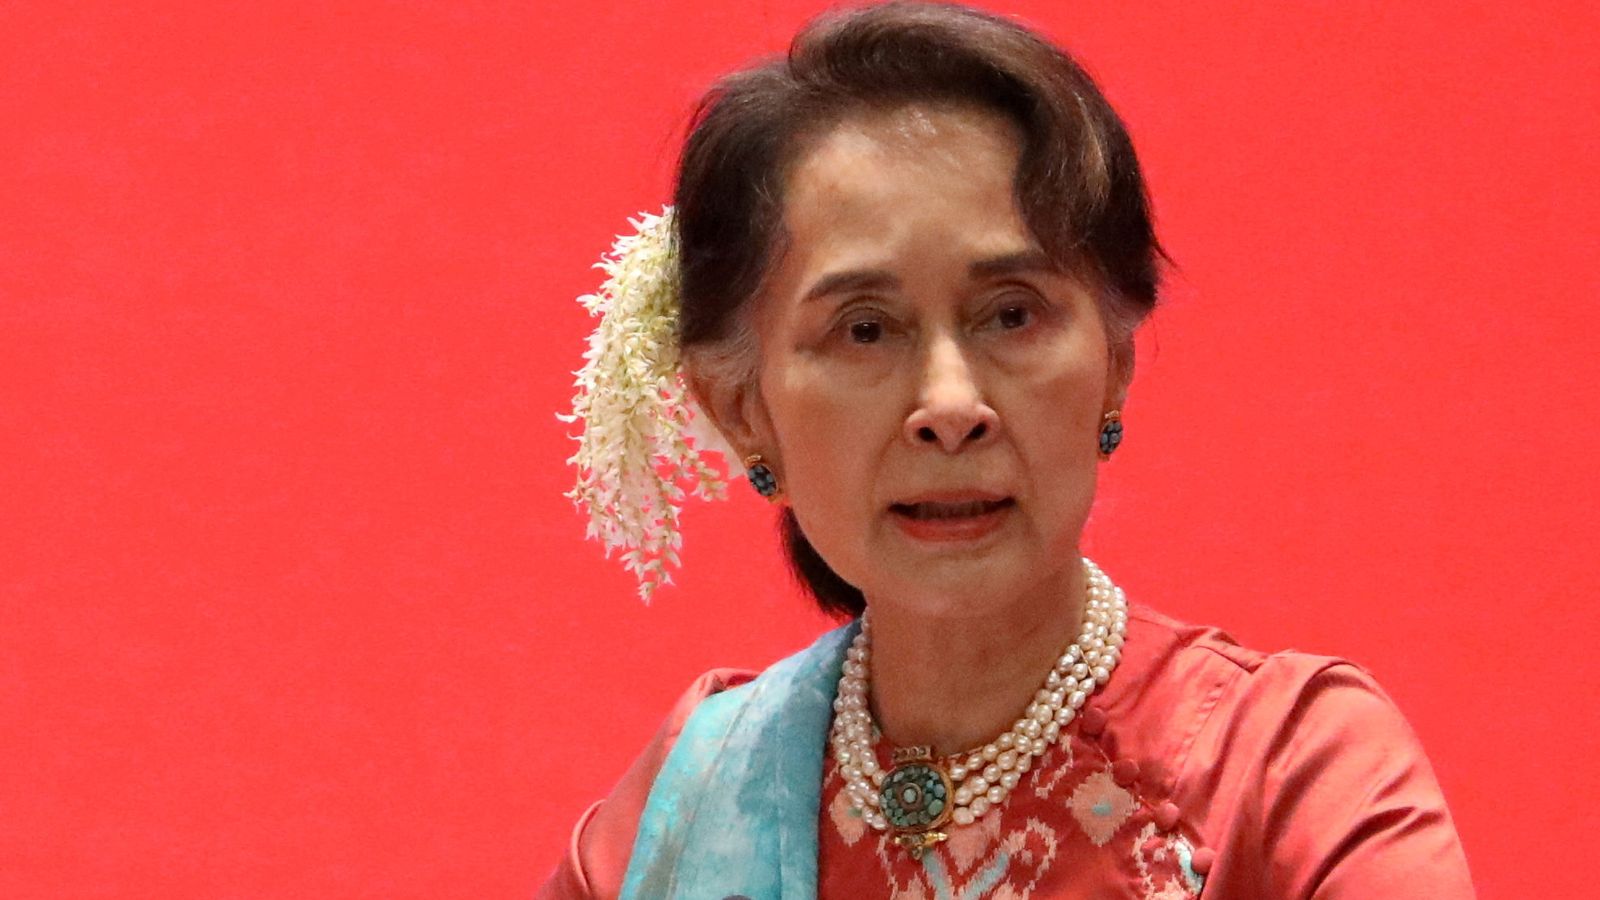 Aung San Suu Kyi receives partial pardon from Myanmar's military junta but to stay under house arrest